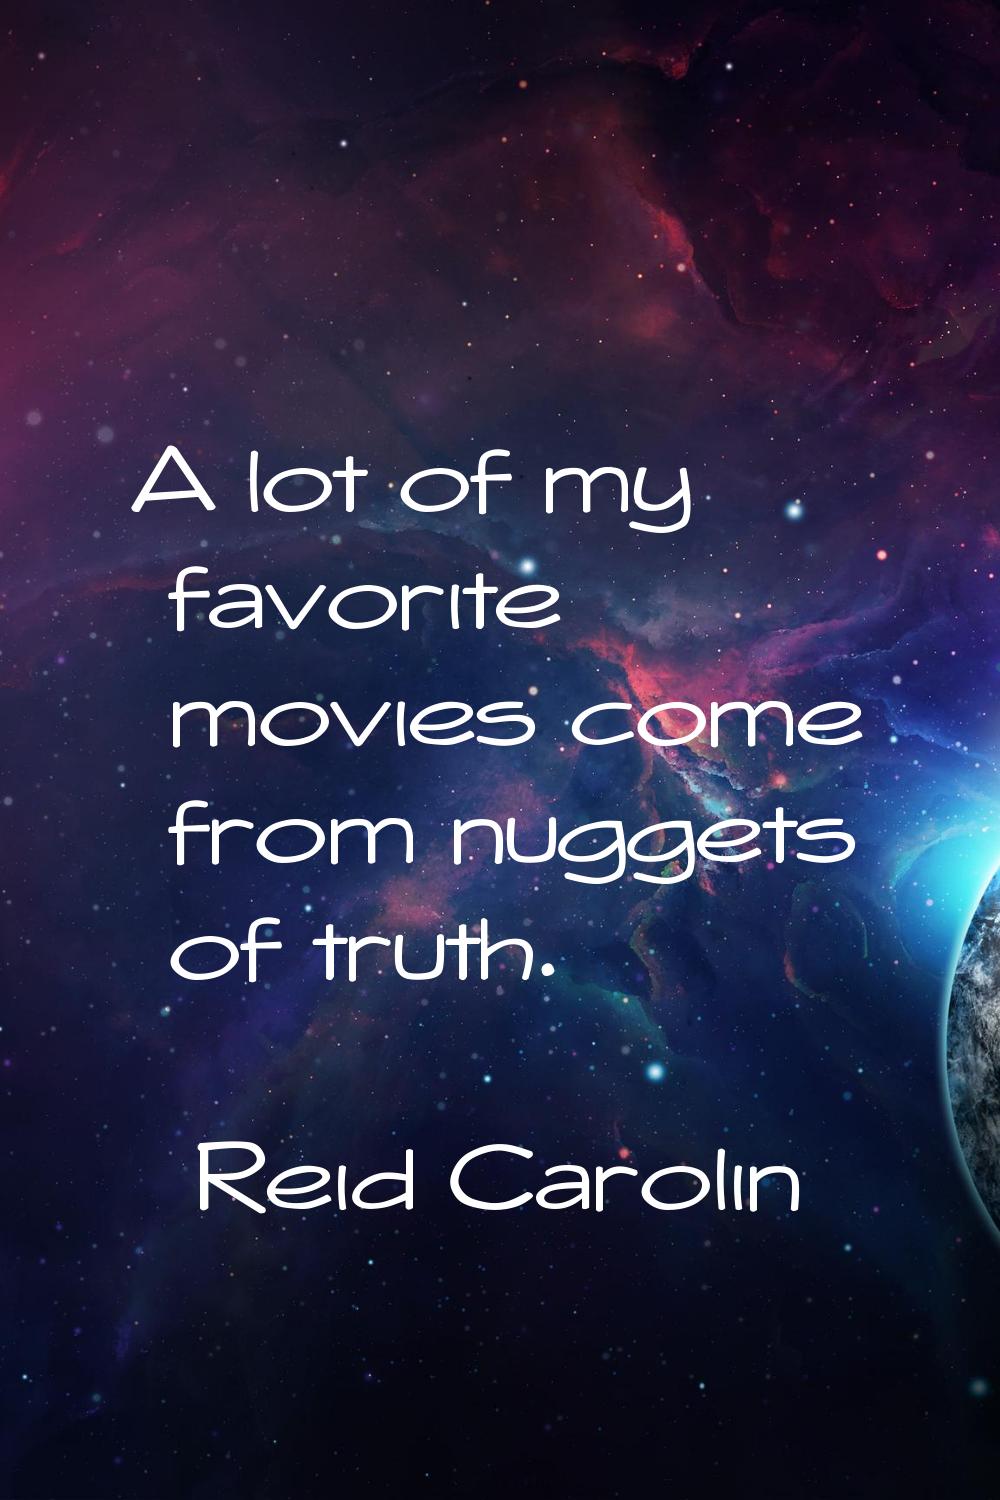 A lot of my favorite movies come from nuggets of truth.